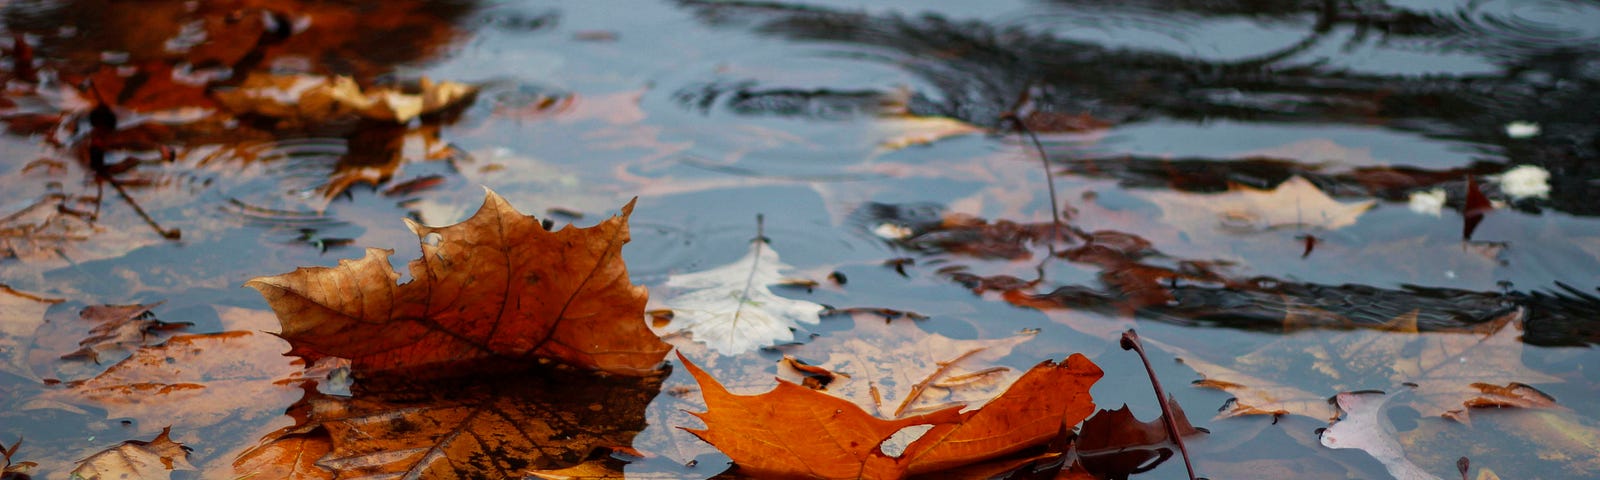 Orange and yellow leaves floating on rippling water.